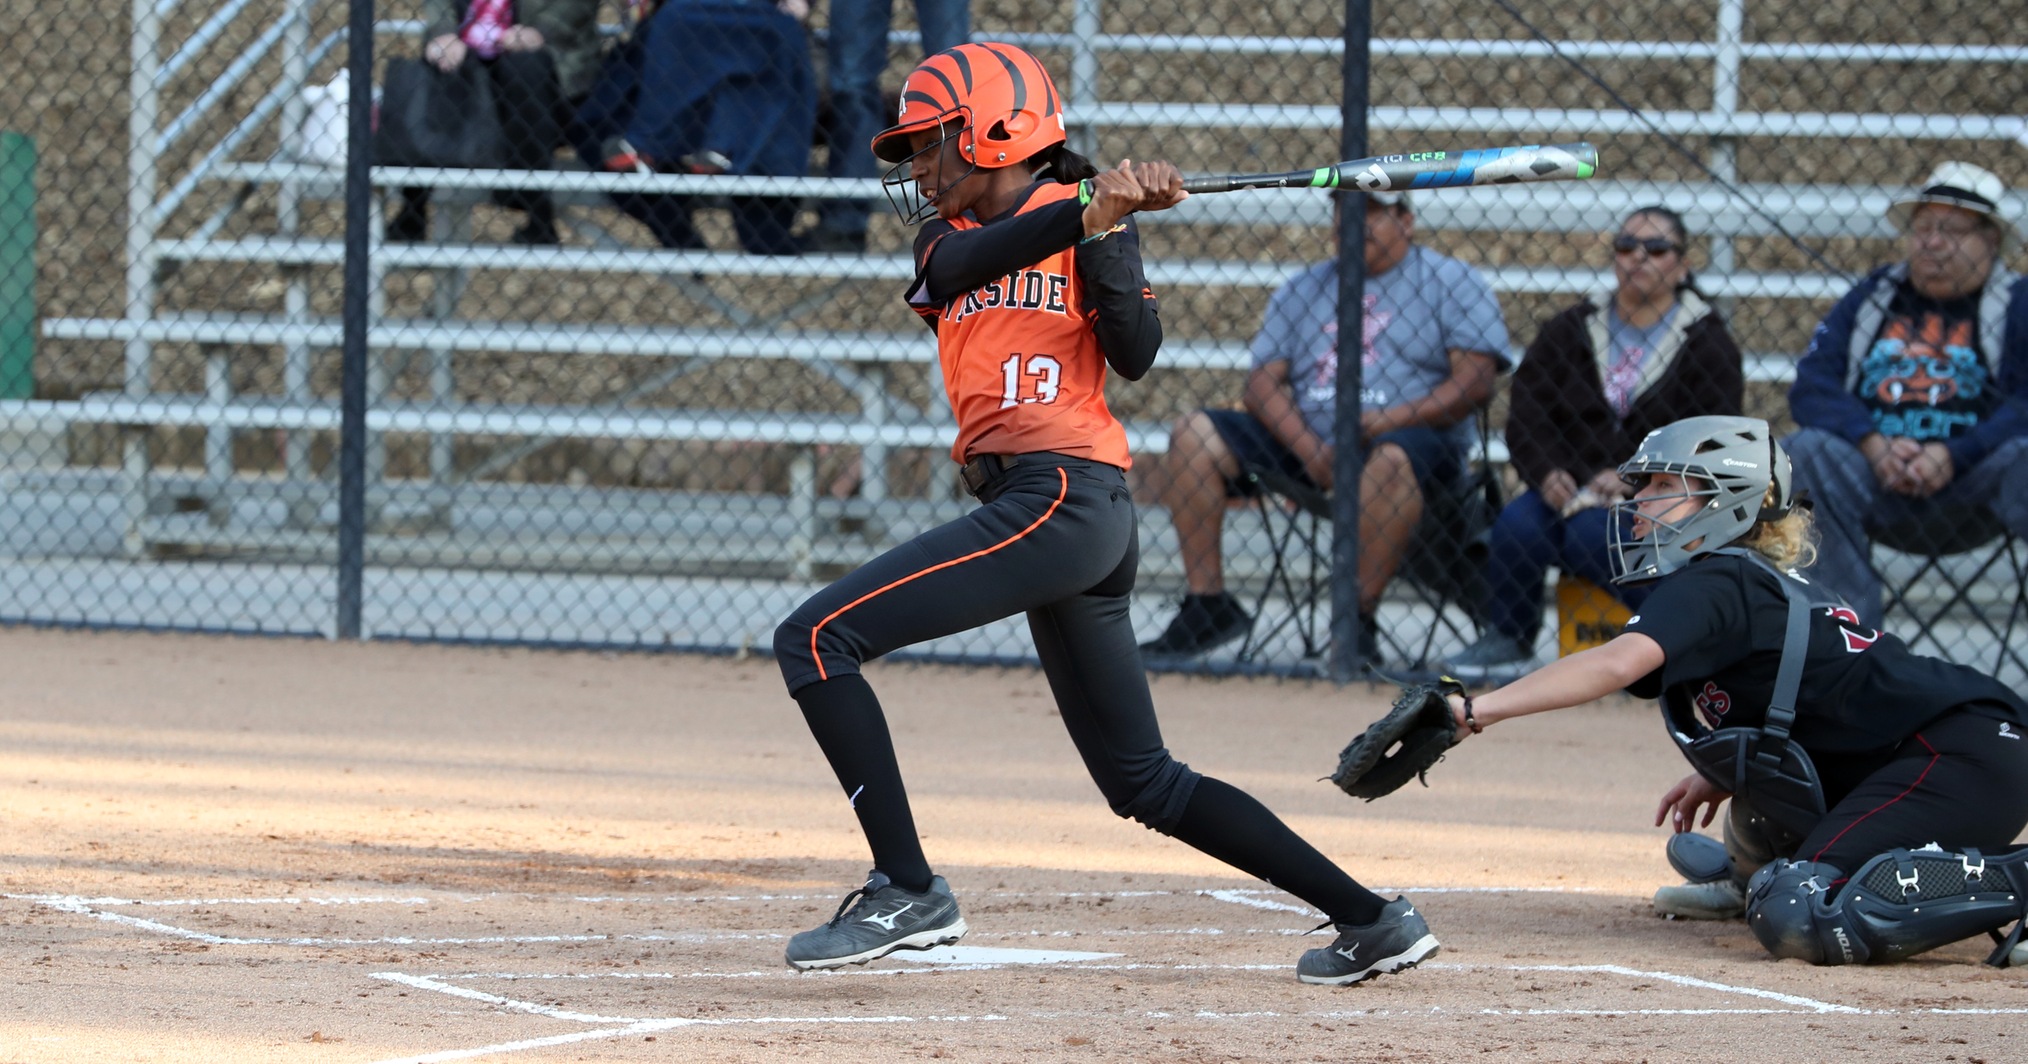 Karter Williams extended her hitting streak to 14-consecutive games by punching in a 3-for-3 night at the dish with three runs scored and an RBI in a victory over SDCC on Tuesday night. (Photo by Bobby R. Hester)